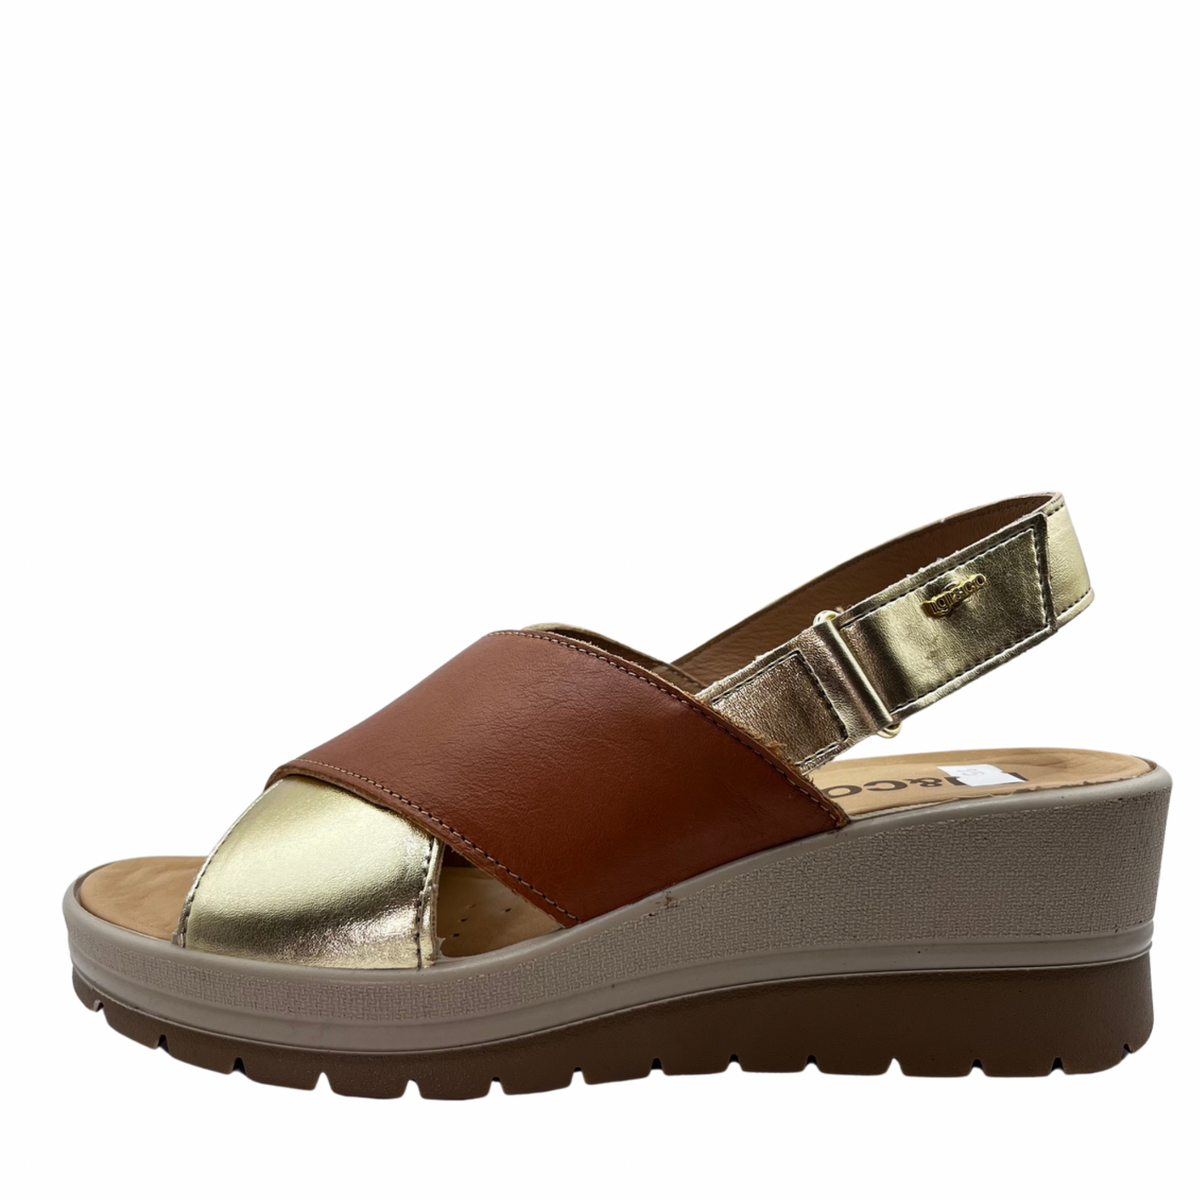 Igi &amp; Co Tan and Gold Wedge leather Sandal